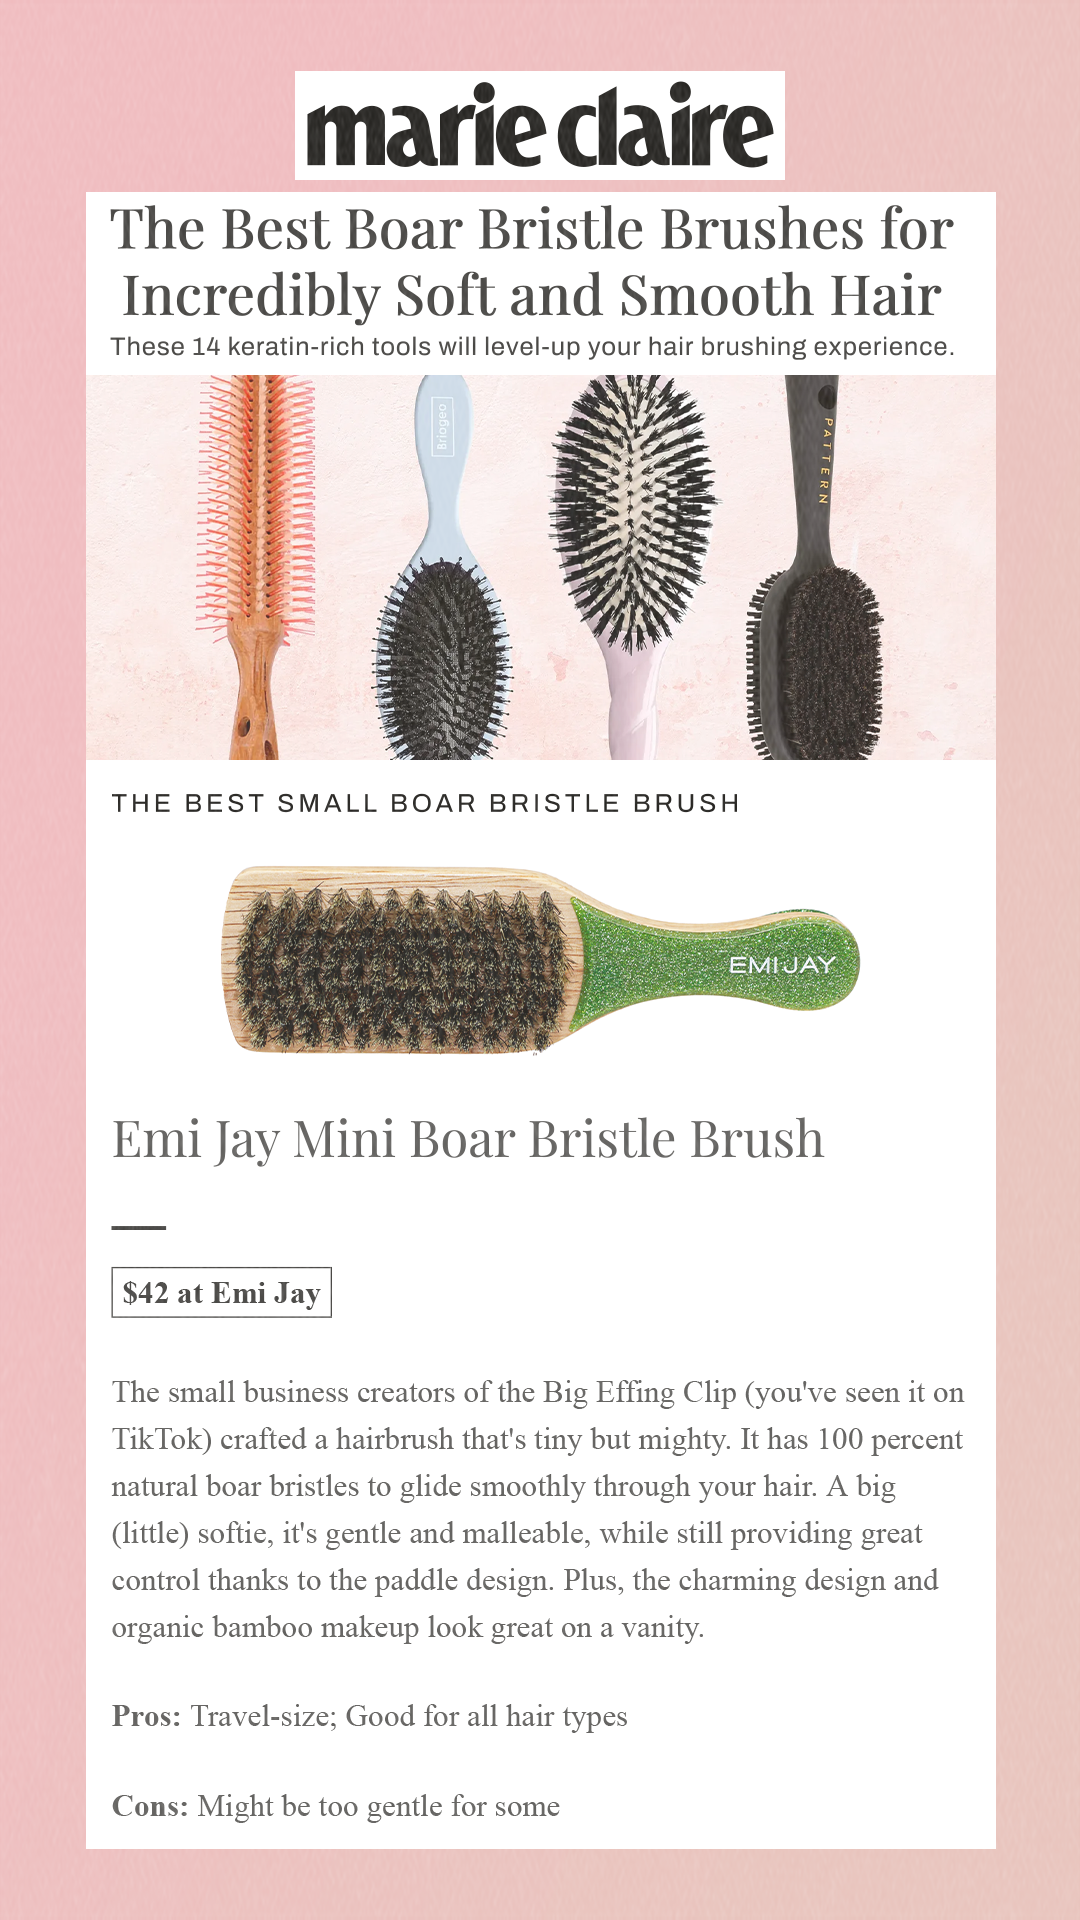 The Best Boar Bristle Brushes for Incredibly Soft and Smooth Hair These 14 keratin-rich tools will level-up your hair brushing experience. The Best Small Boar Bristle Brush Emi Jay Mini Boar Bristle Brush$42 at Emi Jay The small business creators of the Big Effing Clip (you've seen it on TikTok) crafted a hairbrush that's tiny but mighty. It has 100 percent natural boar bristles to glide smoothly through your hair. A big (little) softie, it's gentle and malleable, while still providing great control thanks to the paddle design. Plus, the charming design and organic bamboo makeup look great on a vanity. Pros: Travel-size; Good for all hair types Cons: Might be too gentle for some